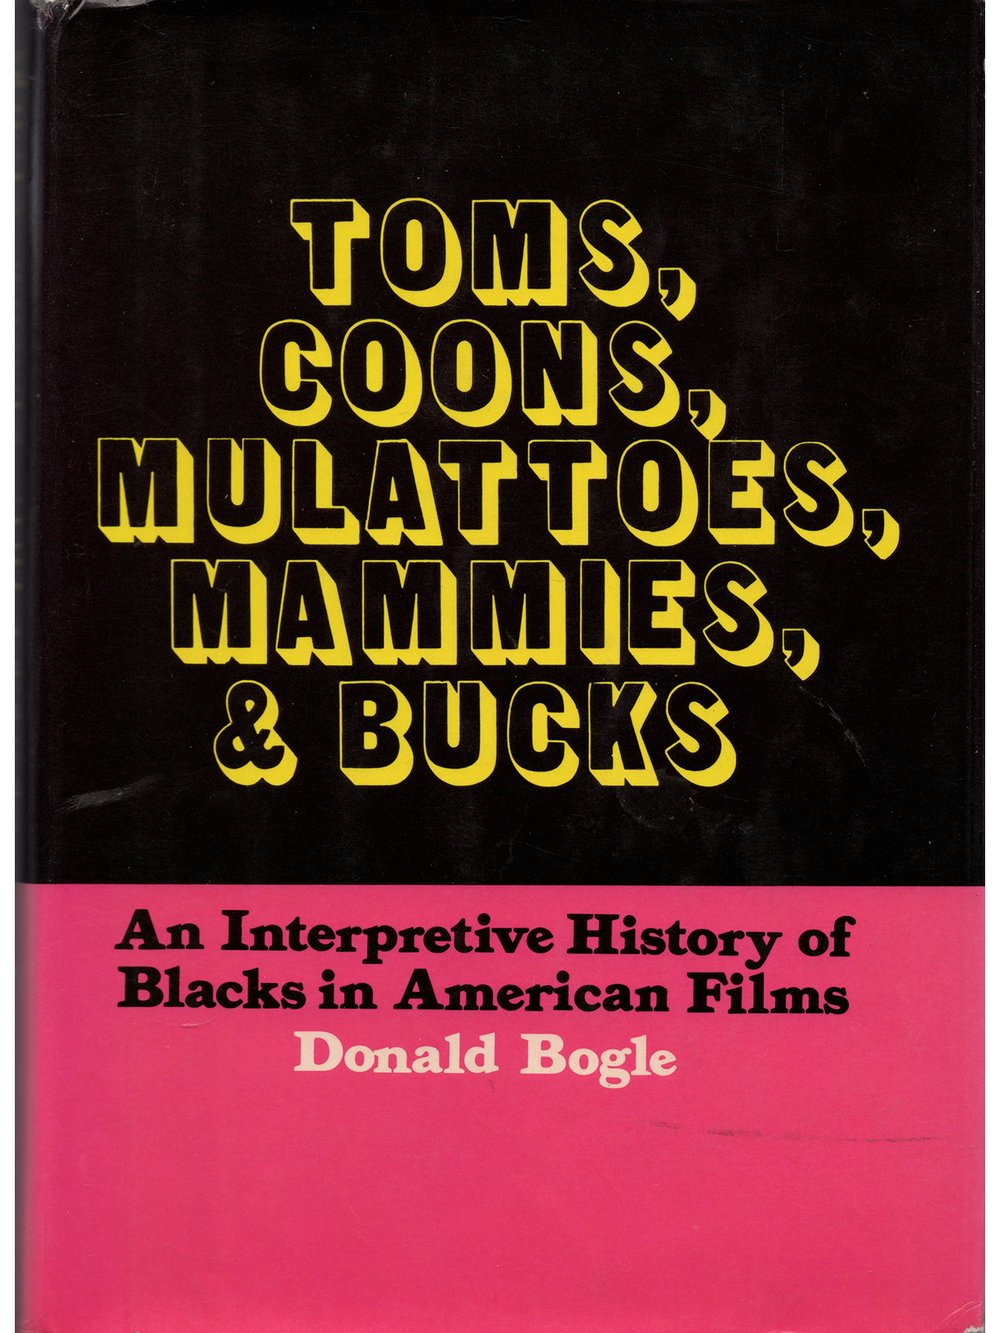 Toms, Coons, Mulattoes, Mammies & Bucks: An Interpretive History of Blacks  in American Films by Donald Bogle (Hardcover First Edition) — Film Desk  Books